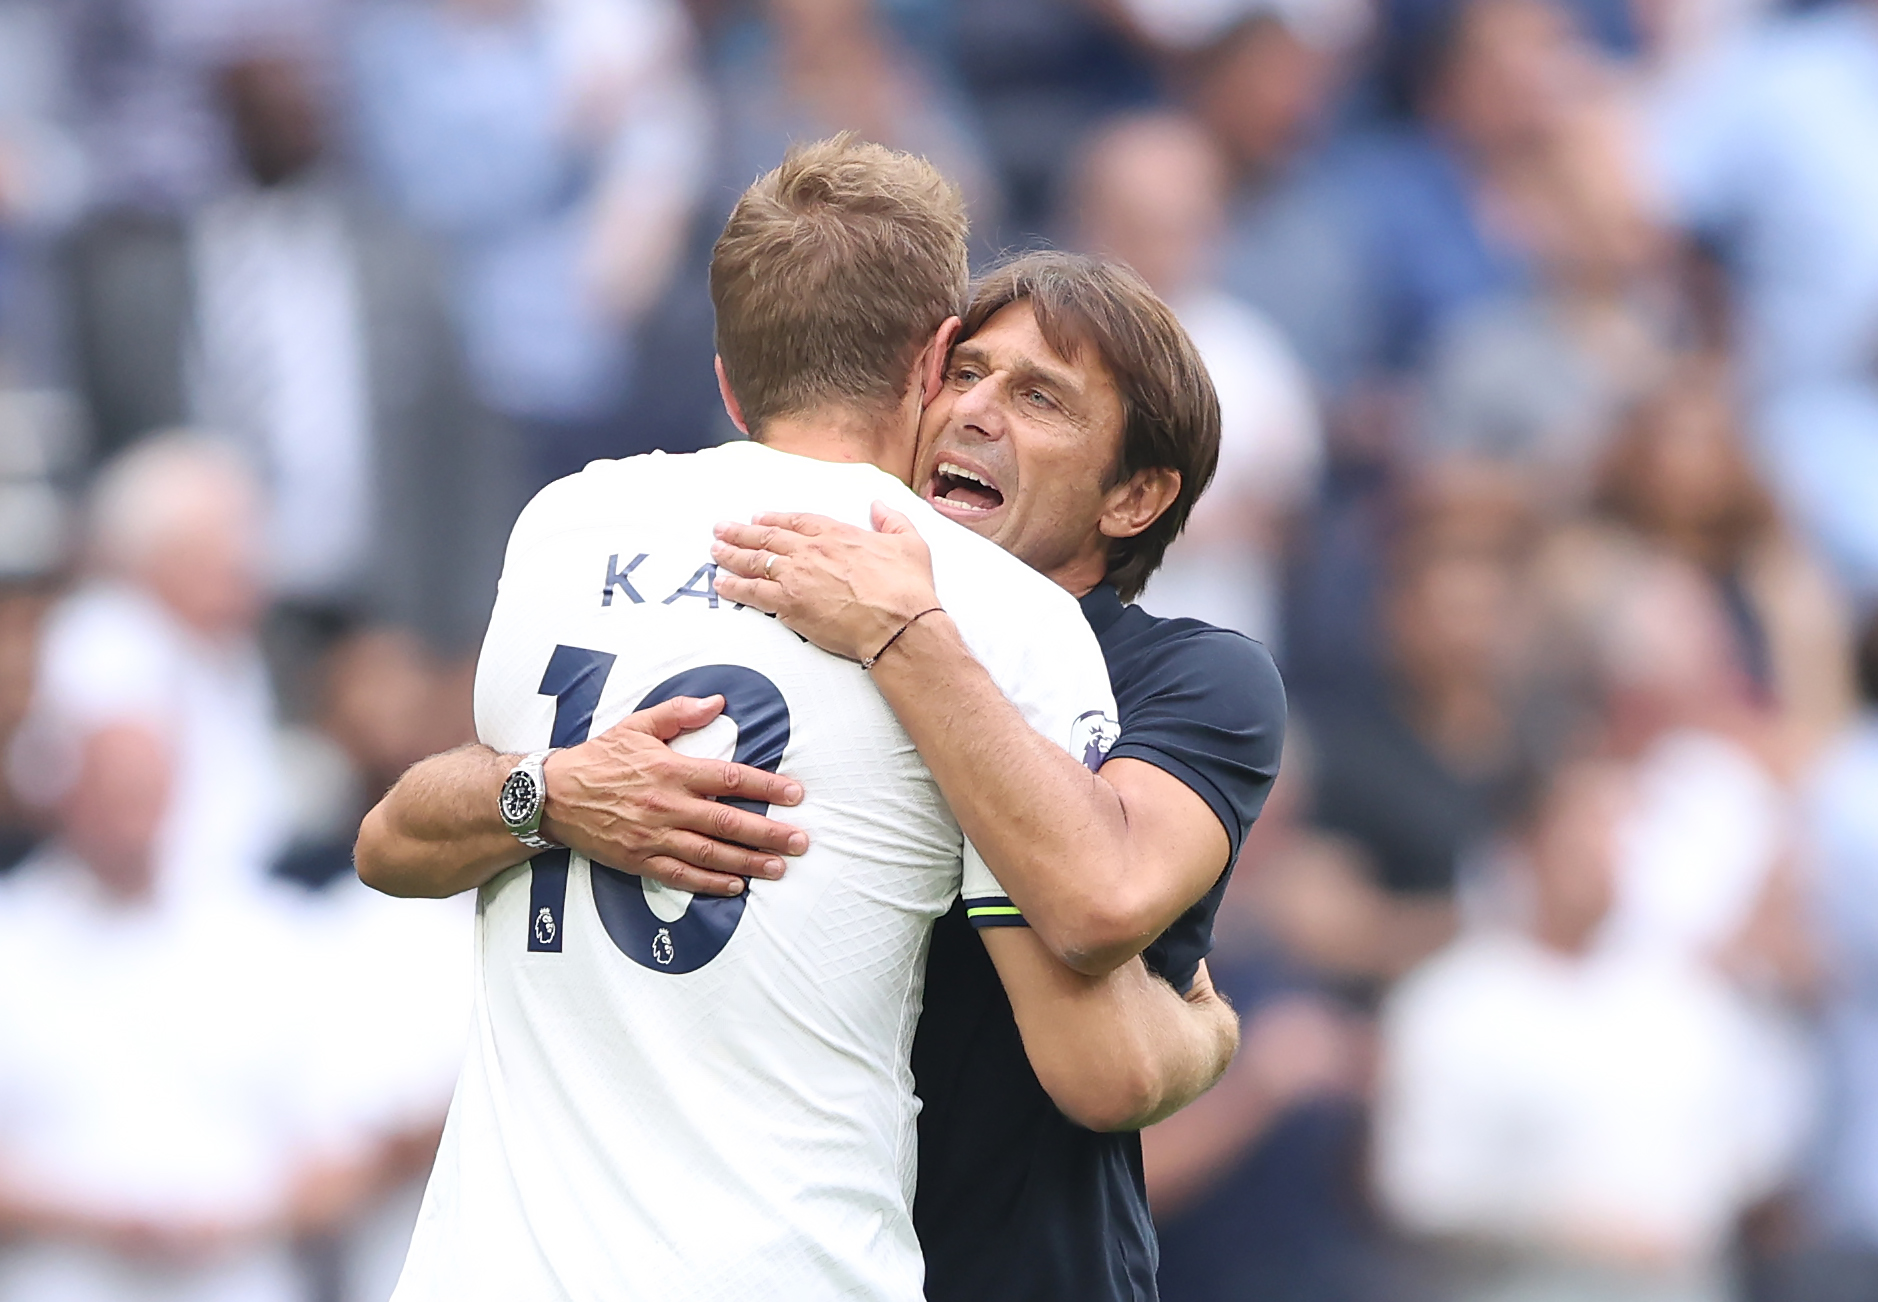 Antonio Conte reveals Tottenham Hotspur want to keep Manchester United target Harry Kane.